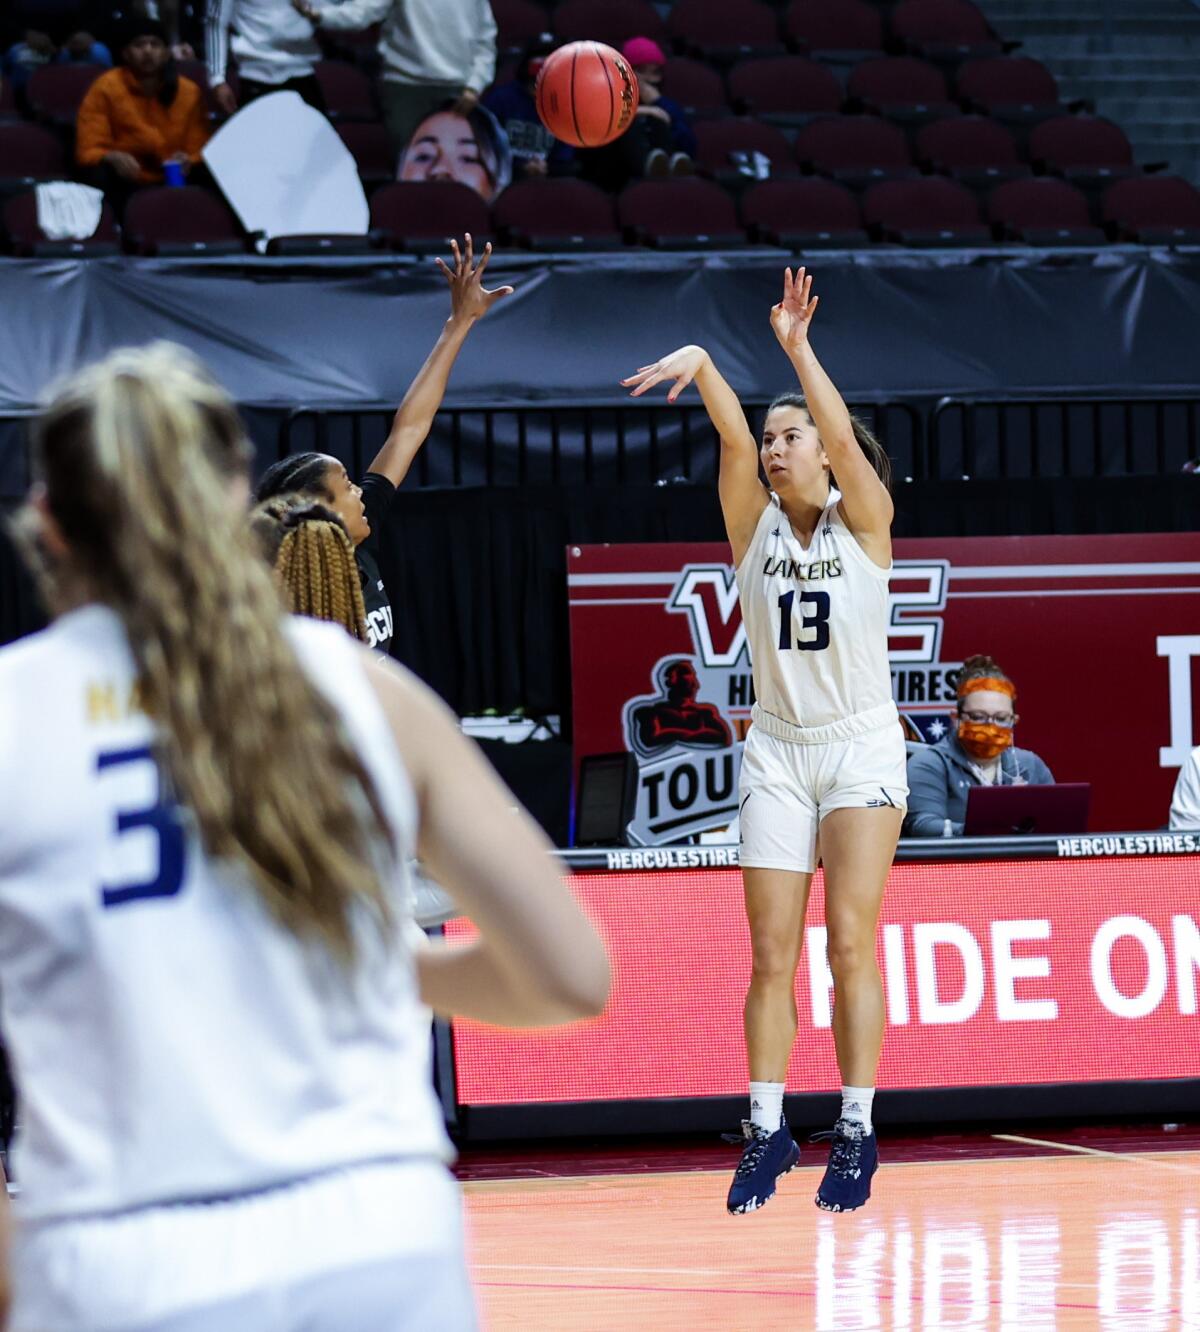 California Baptist sophomore Tiena Neale launches a shot.